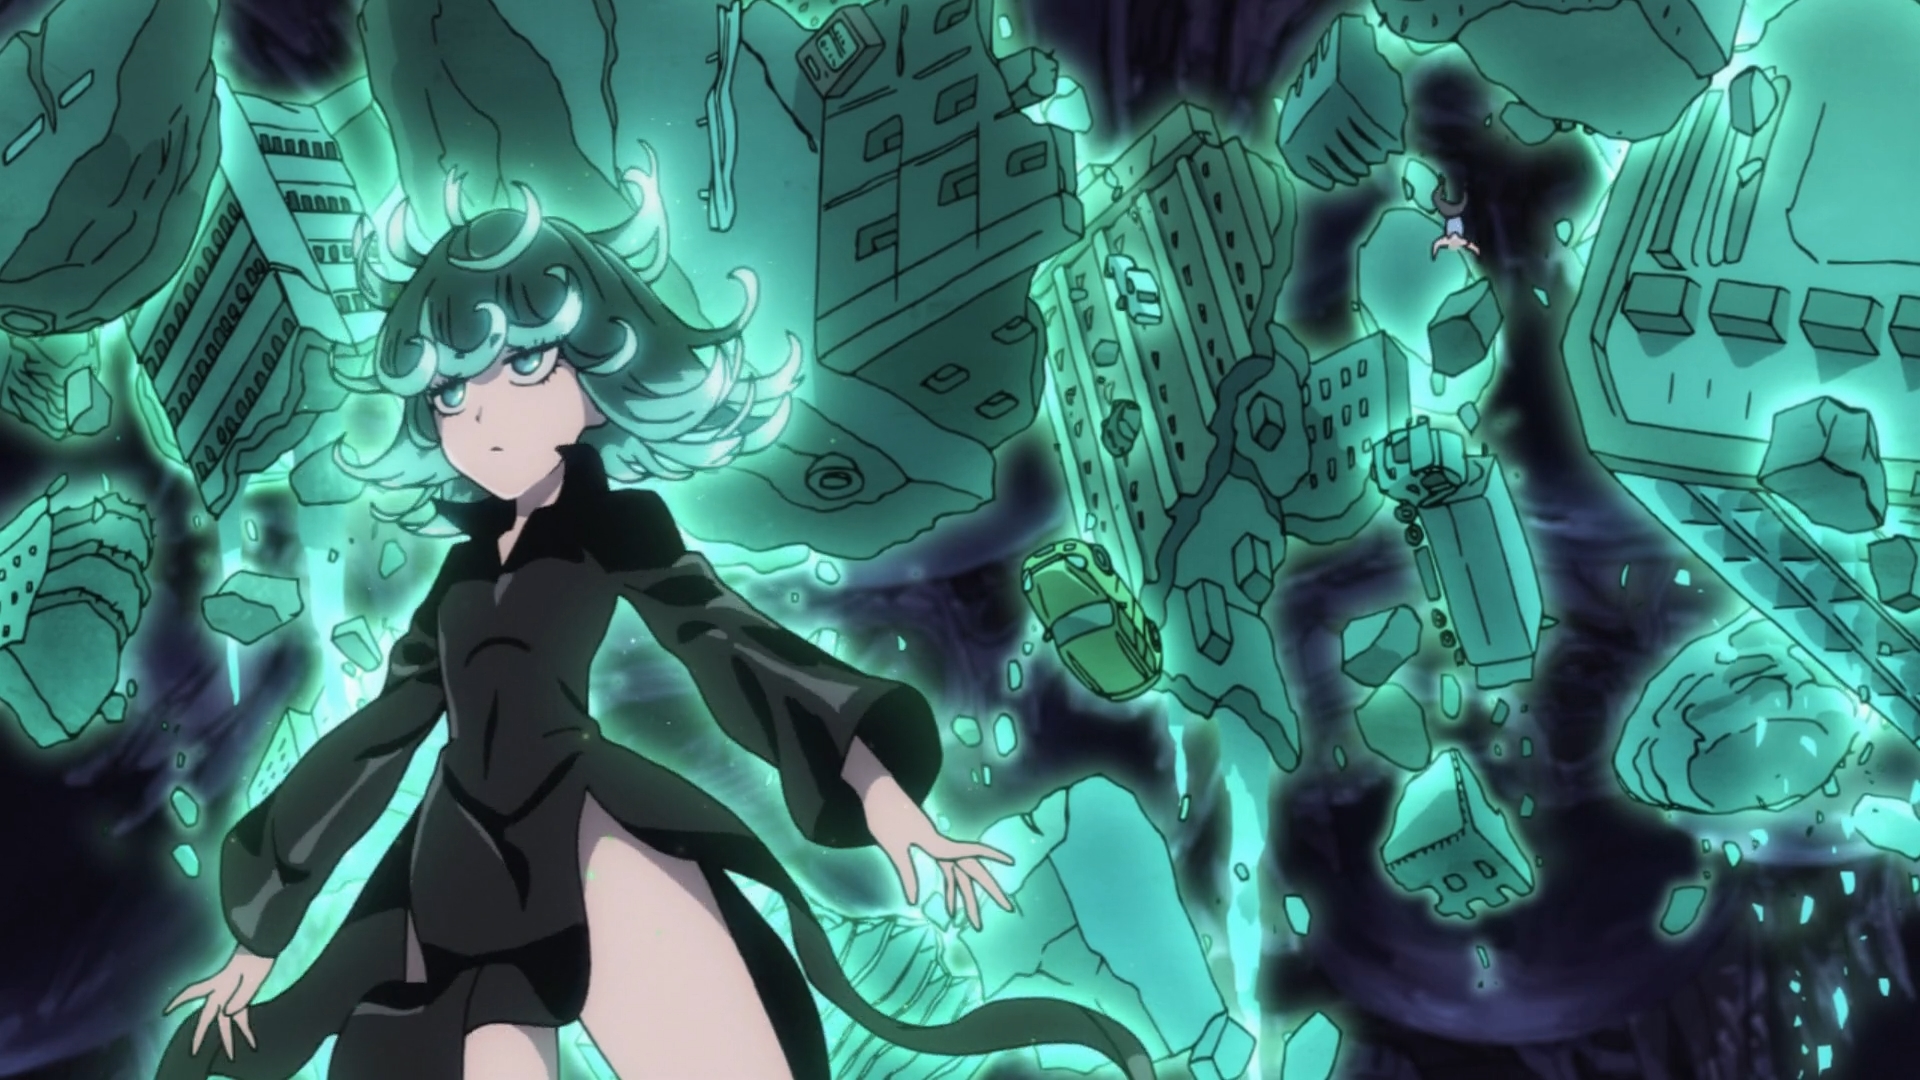 Psychic Powers Characters | Anime-Planet